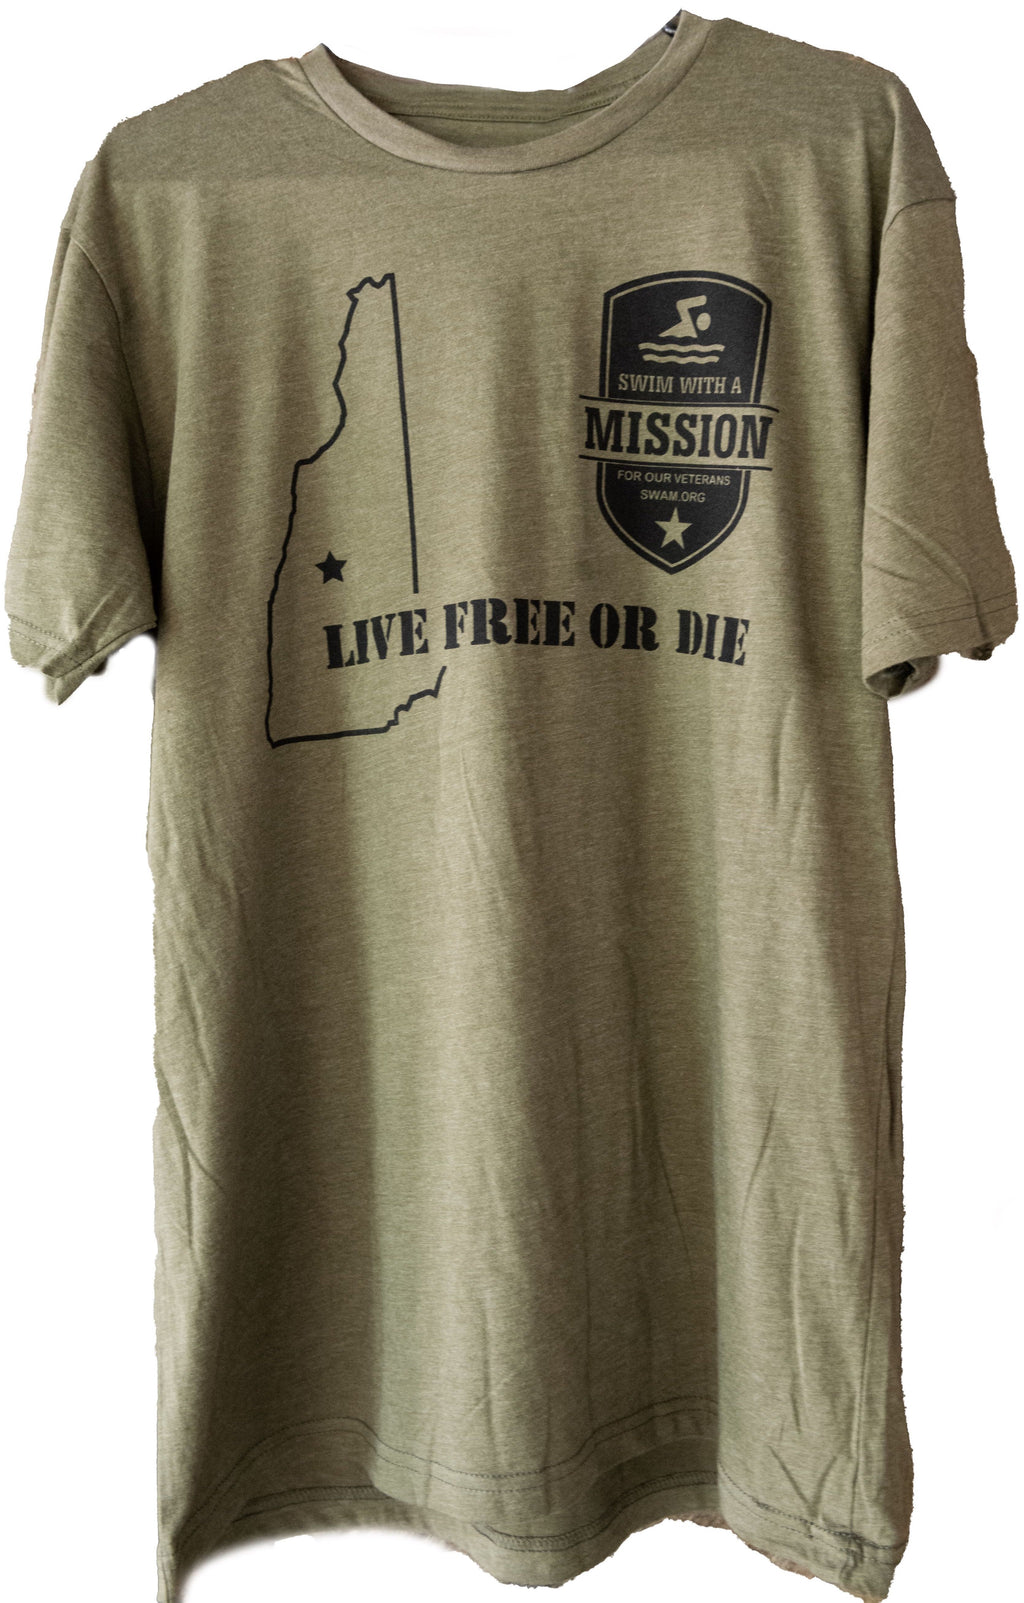 New SWAM23 Green Live Free or Die Shirt